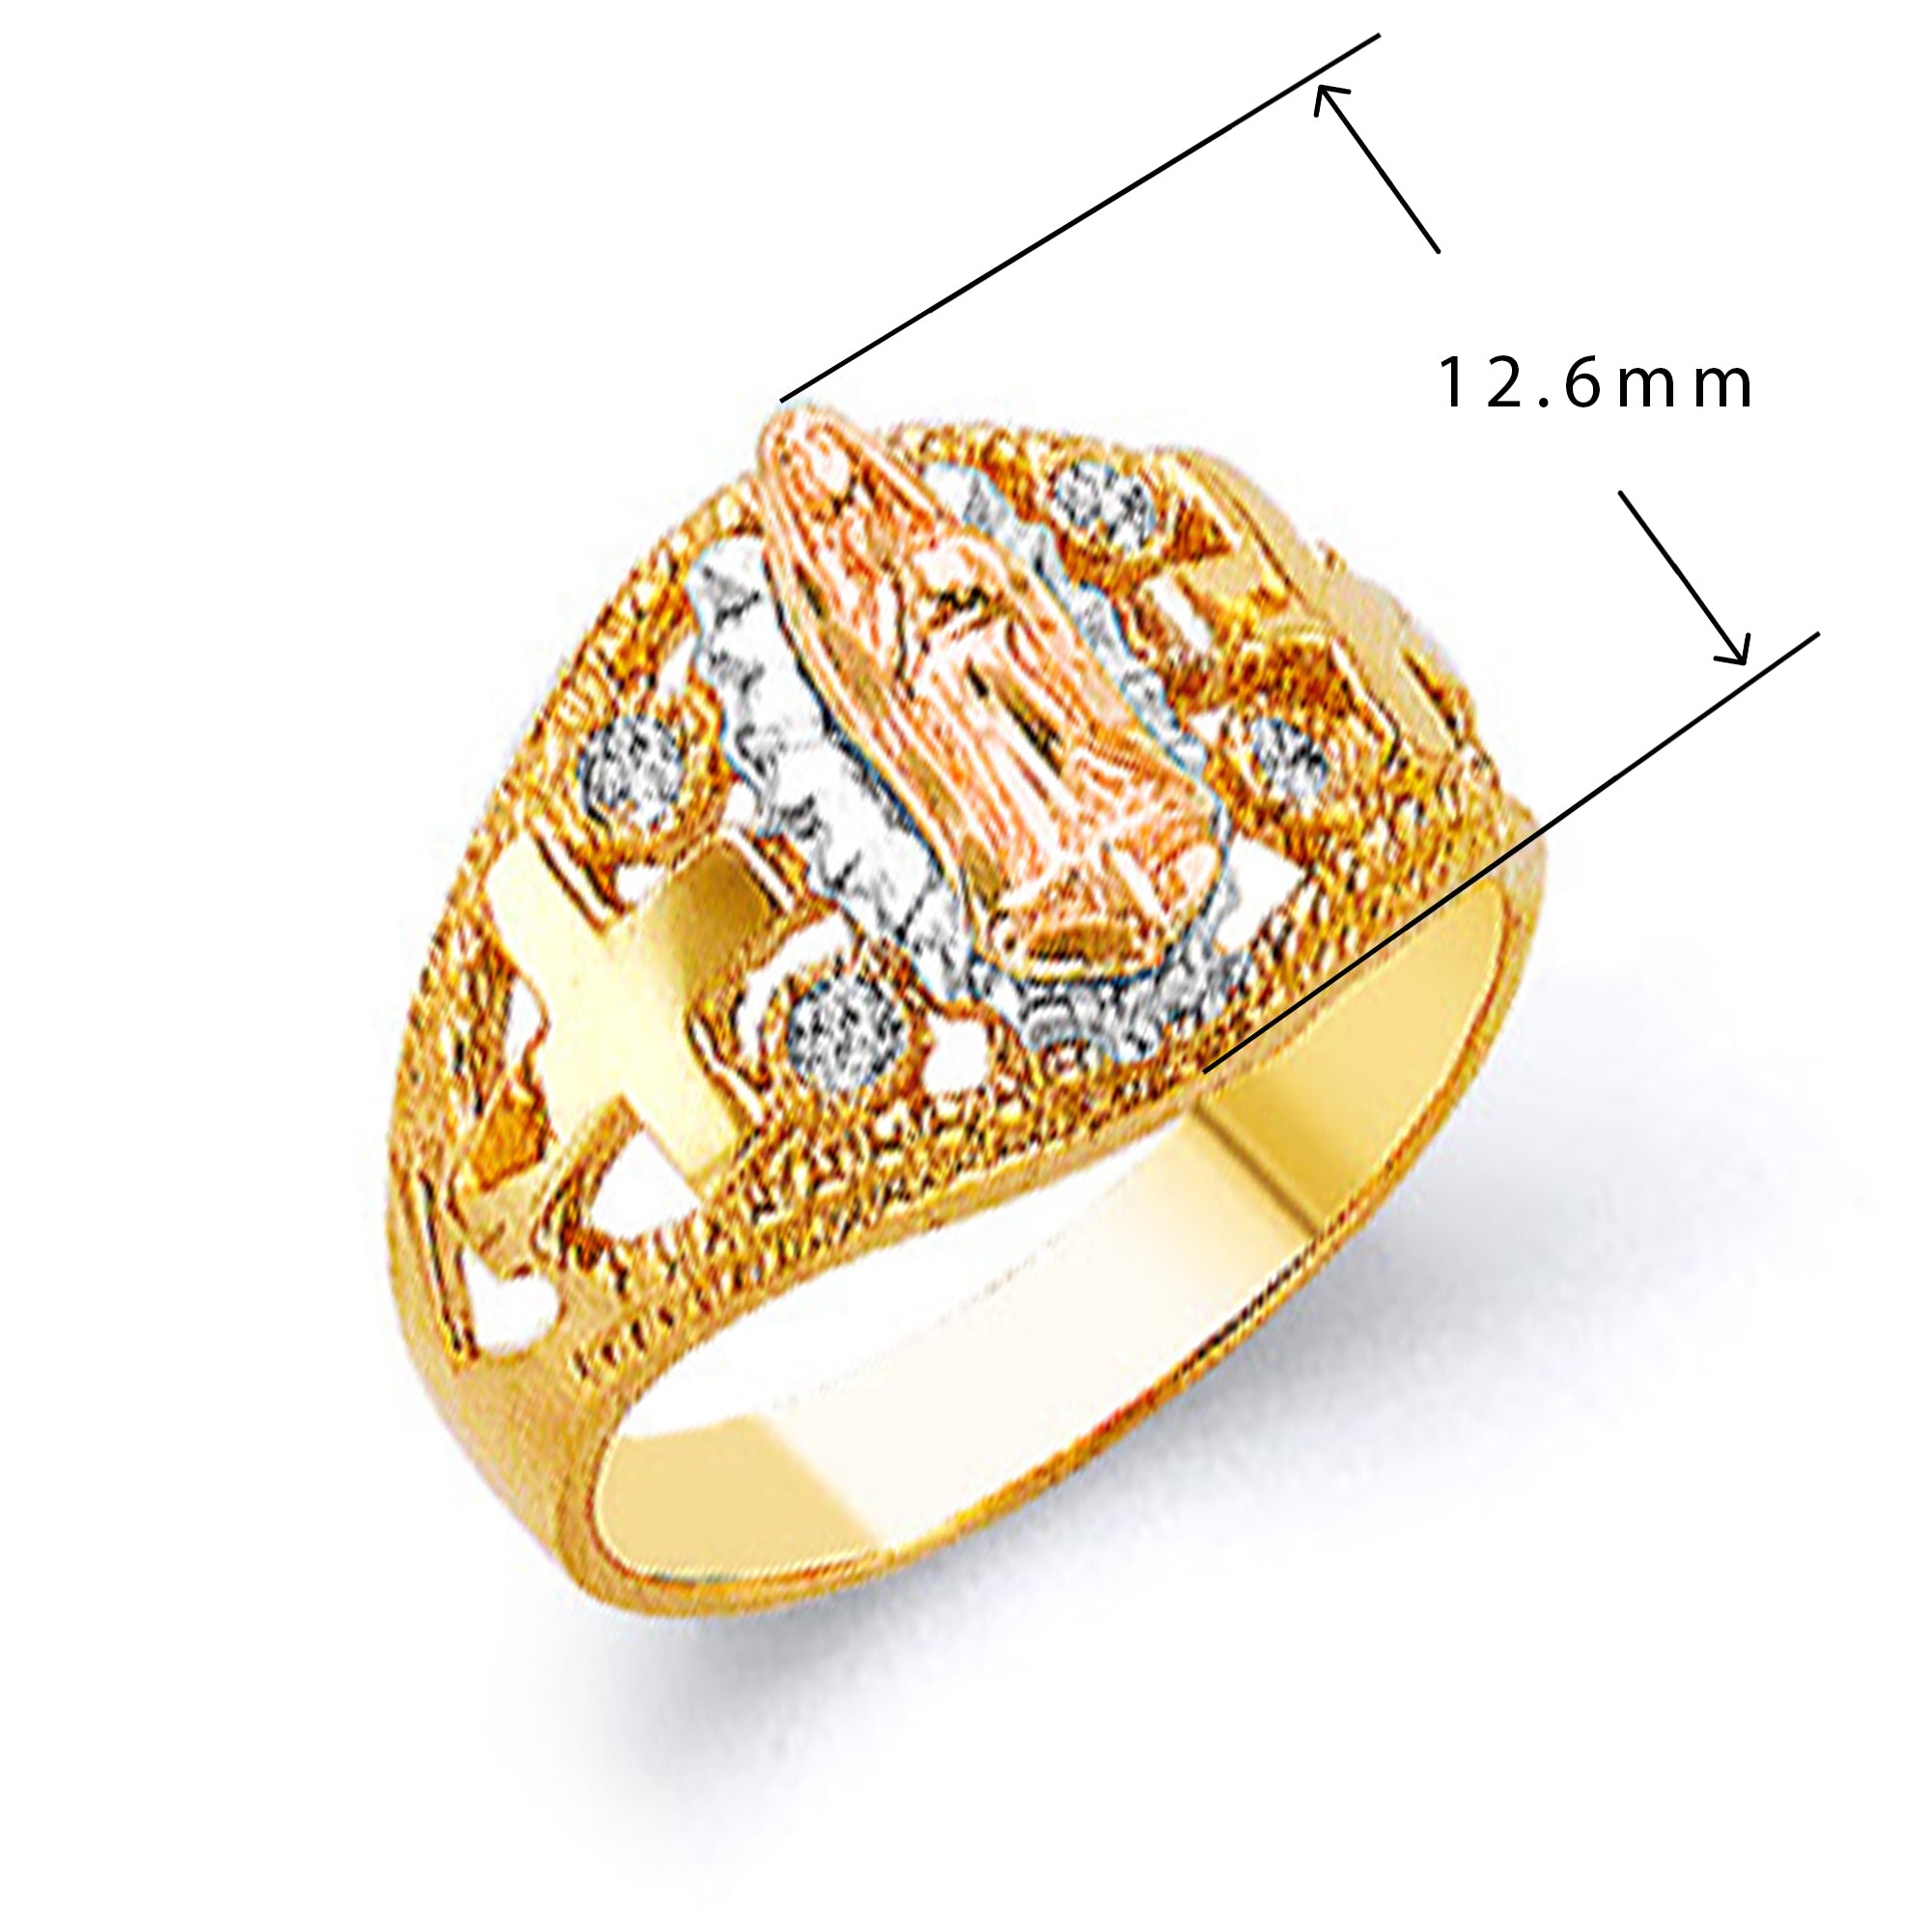 Tri-tone Textured Shank Religious Ring in Solid Gold with Measurement